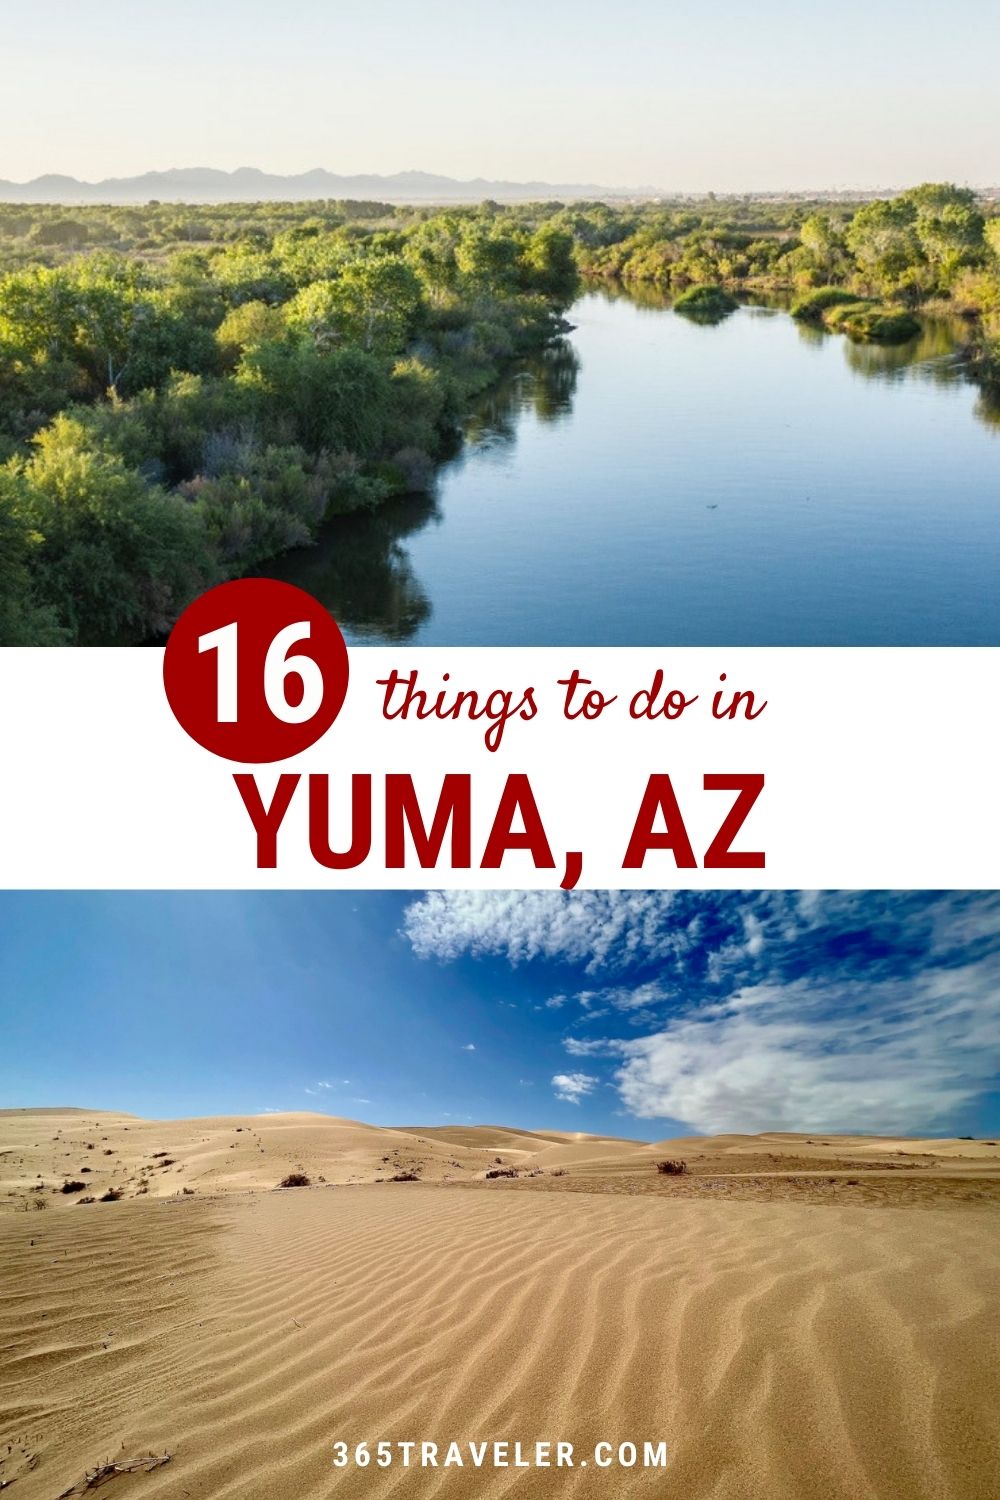 16 Amazing Things To Do in Yuma AZ You Can’t Miss